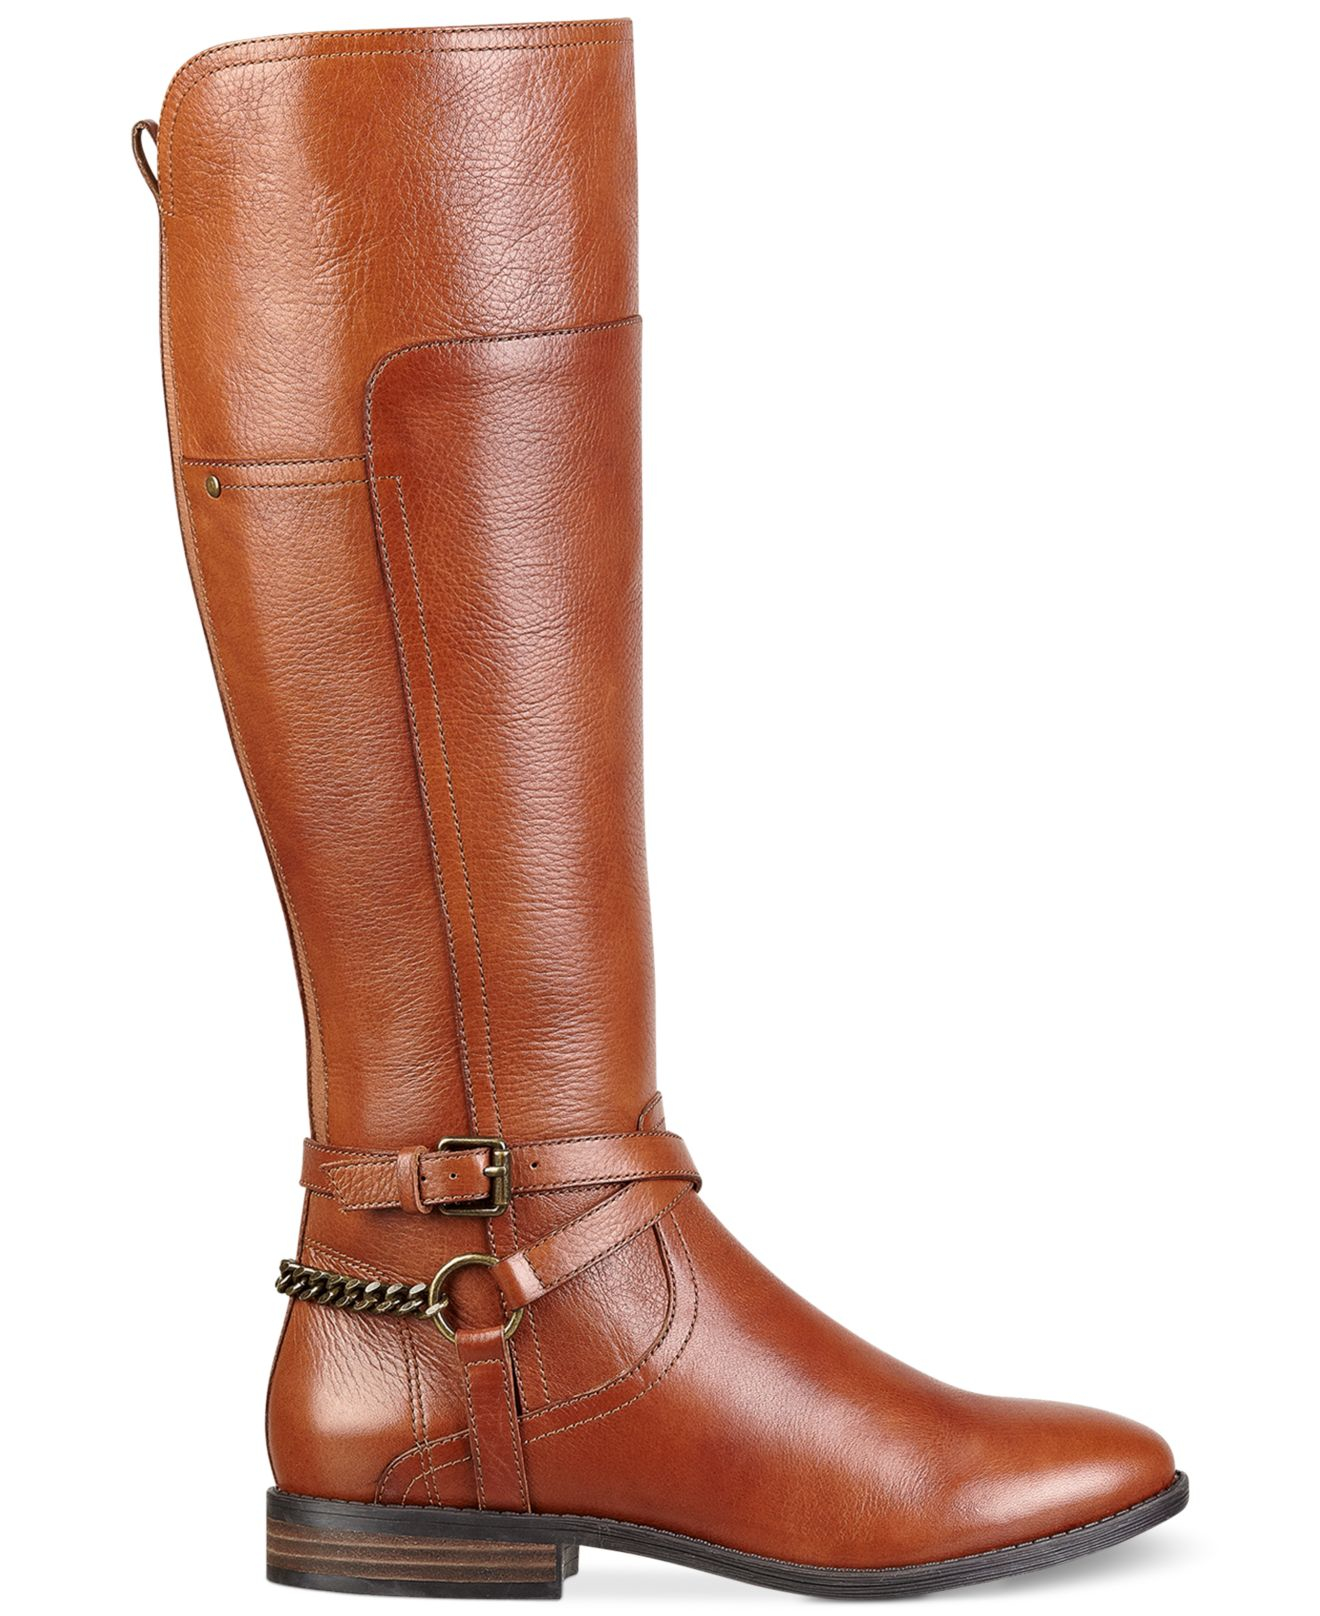 Lyst - Marc Fisher Alexis Tall Riding Boots in Brown